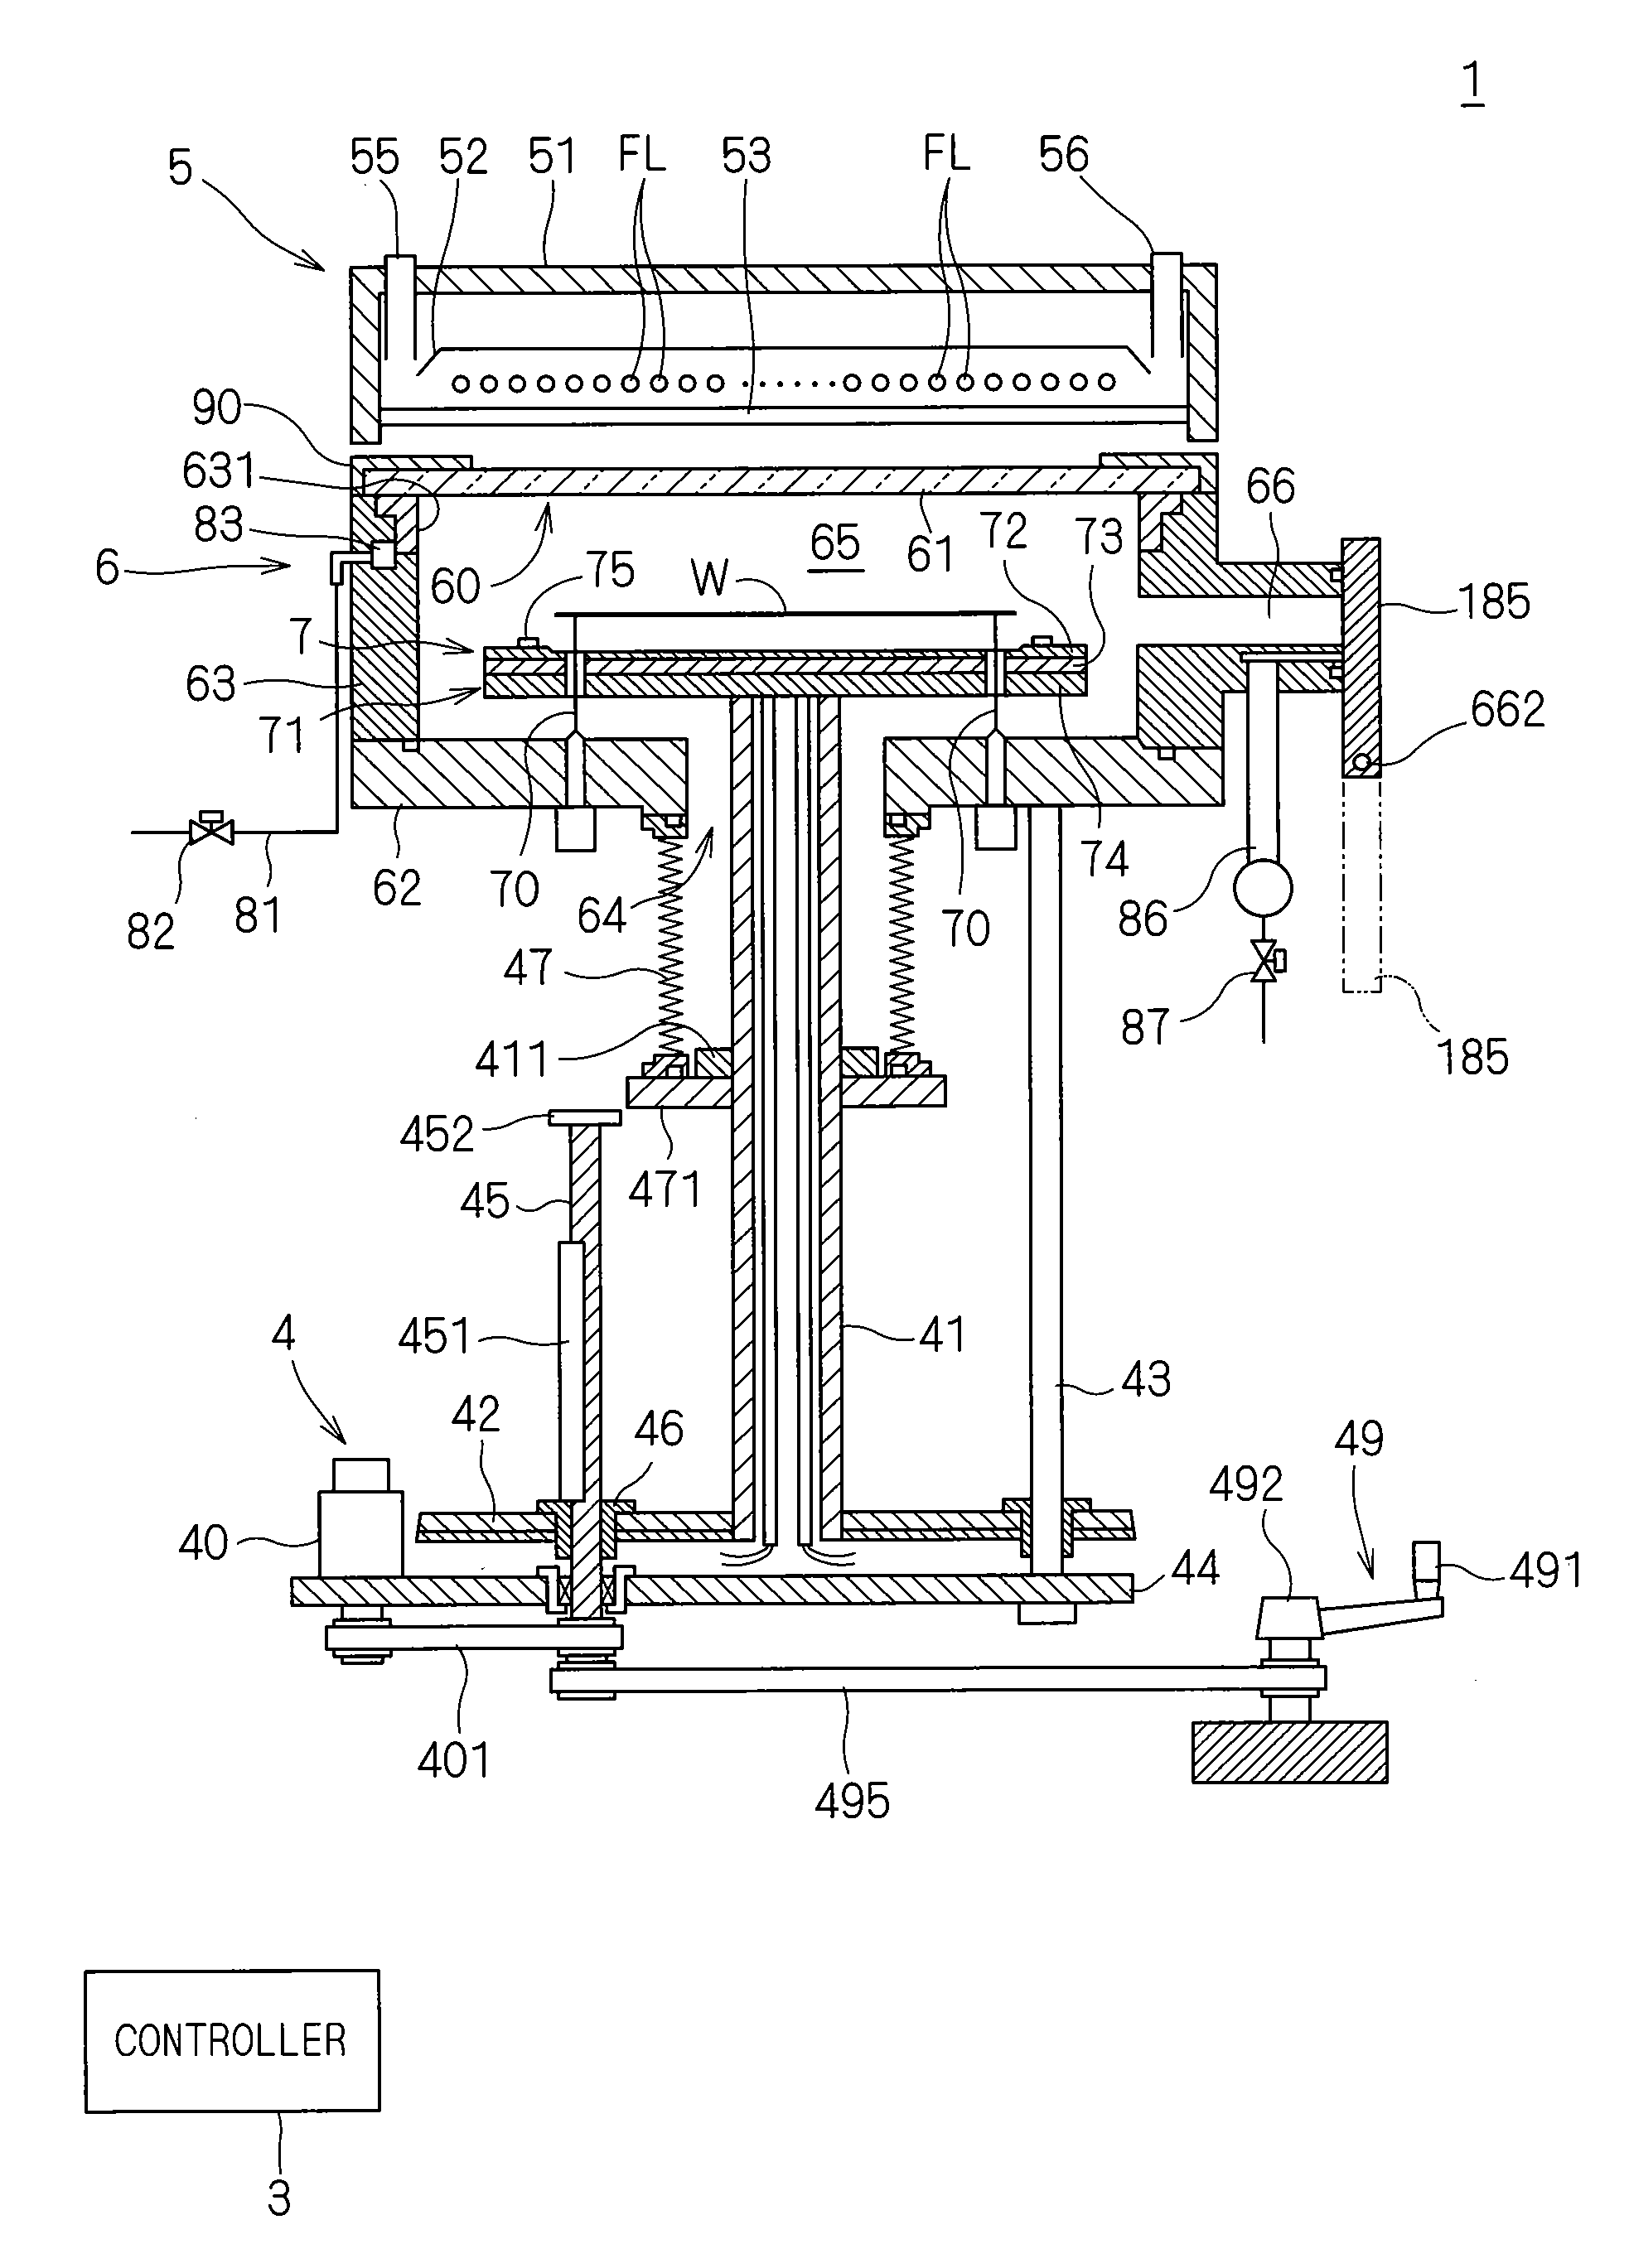 Heat treatment apparatus and method for heating substrate by photo-irradiation